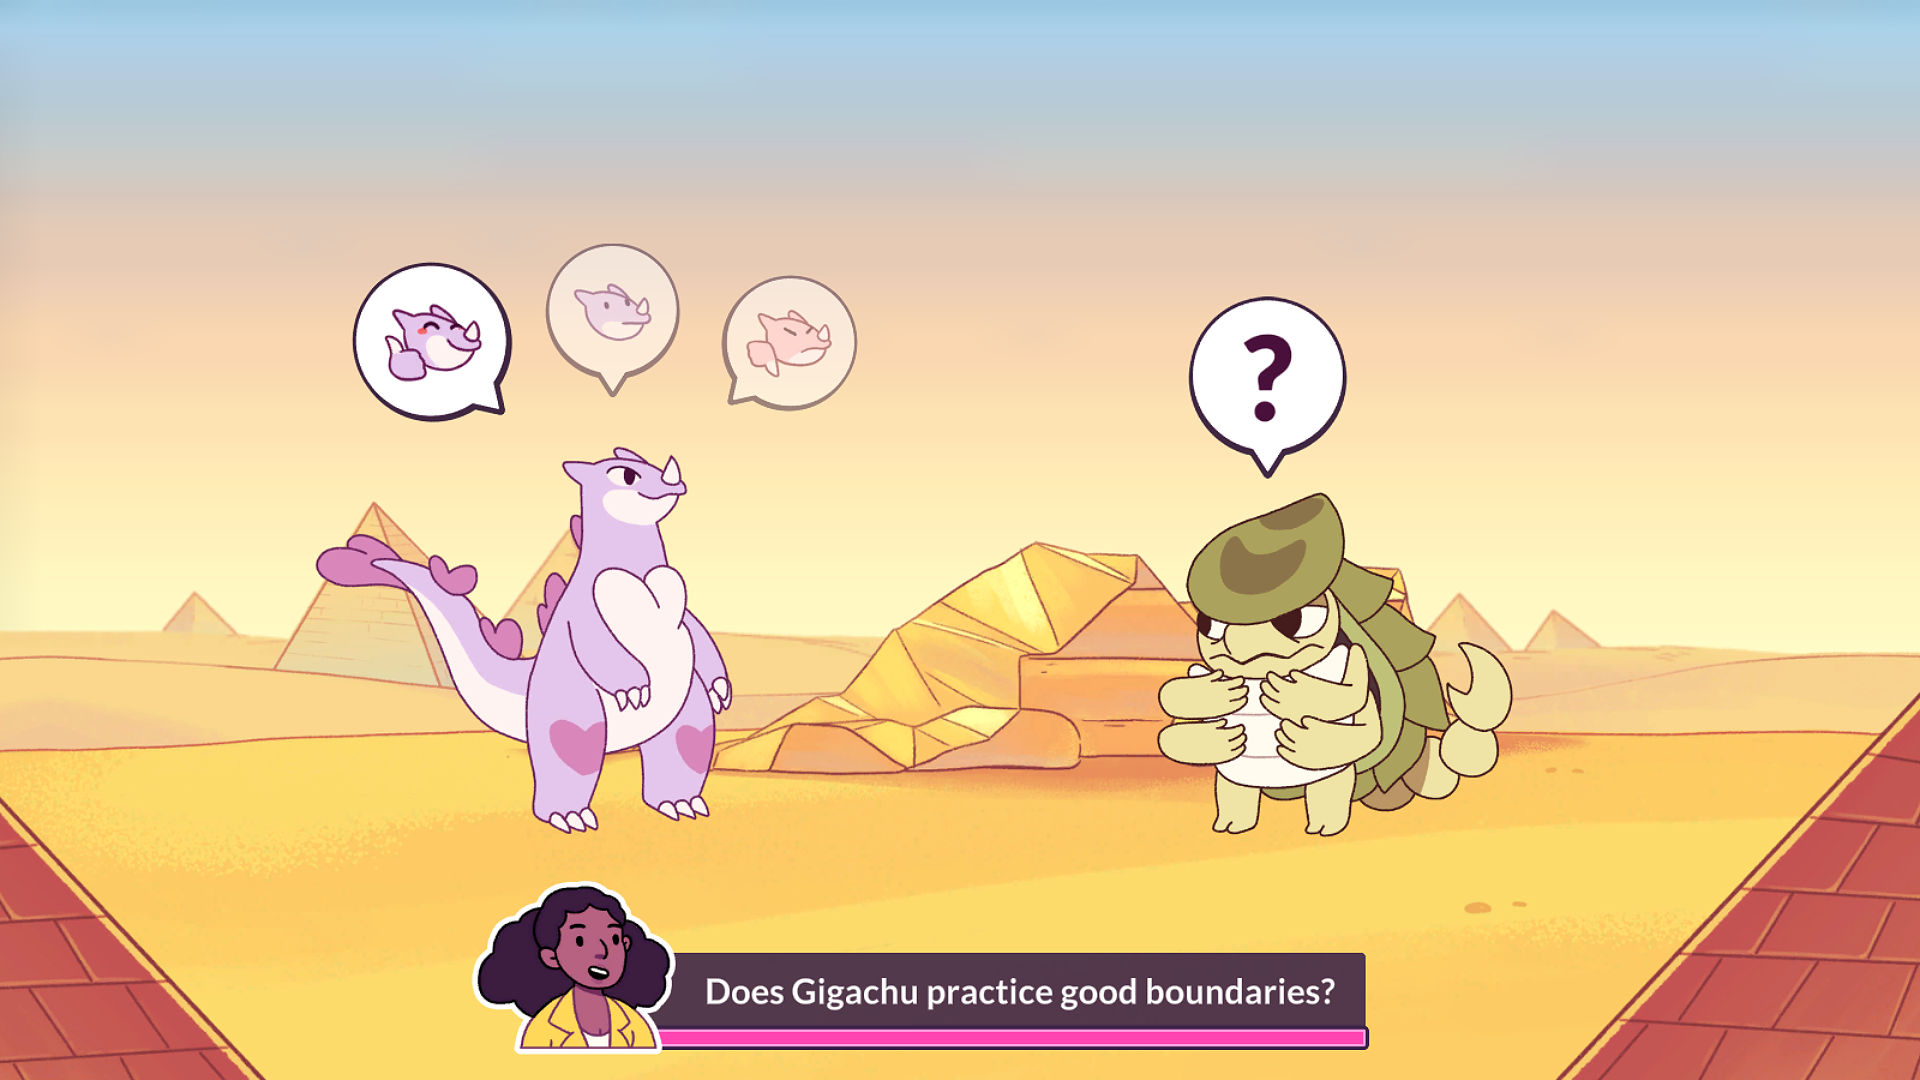 Screenshot from Kaichu - A Kaiju Dating Sim. Screenshot from Kaichu - A Kaiju Dating Sim. Two monsters stand in the middle of a desert in front of a rubble of sand and rock. The pink-colored, reptilian monster on the left has various expressions floating above their head, while the turtle-like monster standing on the right has a question mark floating above their head. A string of dialogue with the portrait of a Black woman wearing a yellow blazer on the bottom of the screen reads, "Does Gigachu practice good boundaries?"